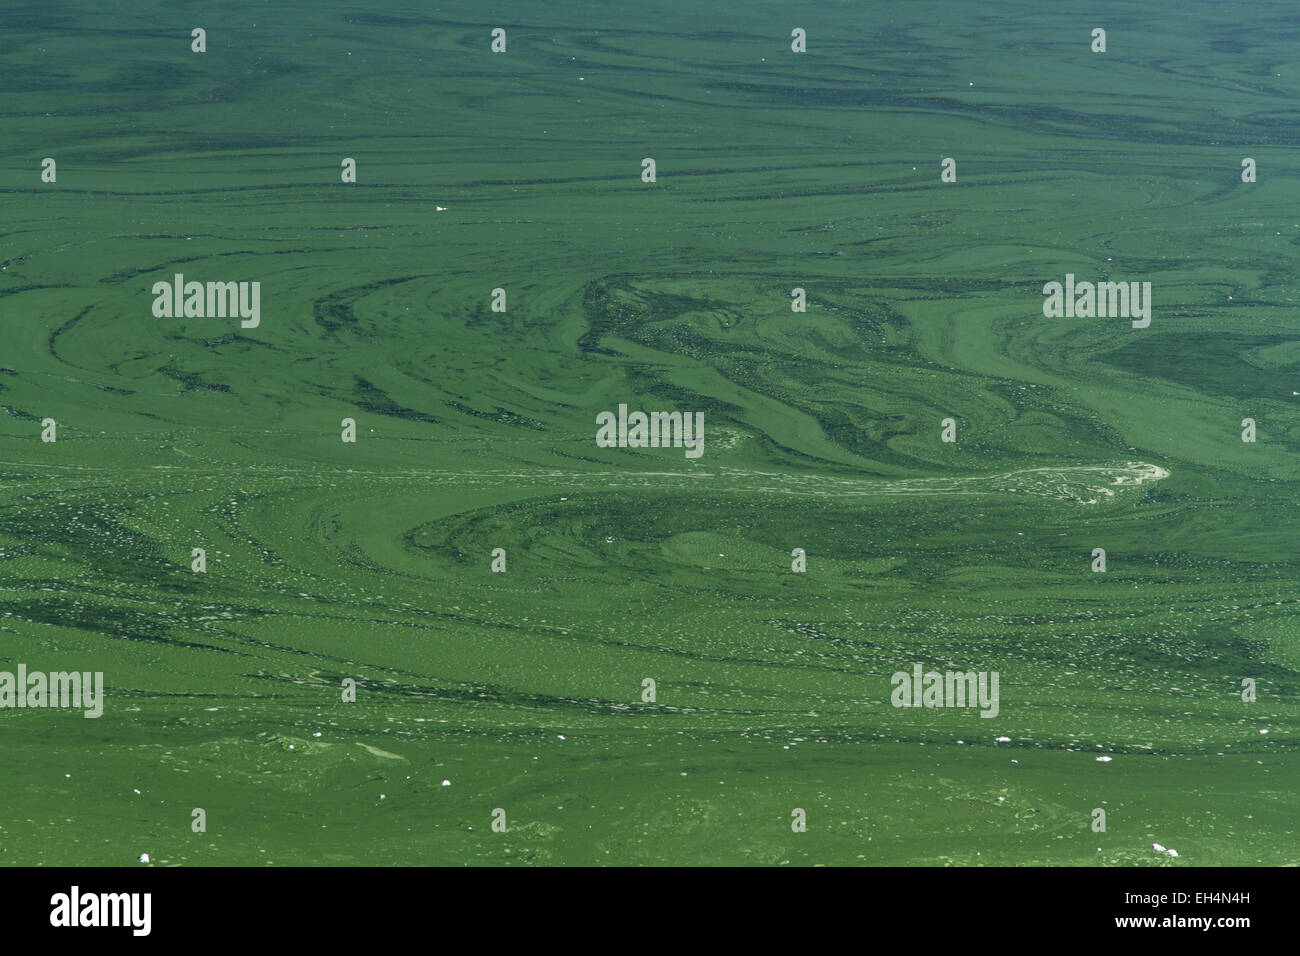 Cyanophyta or blue green algae, layer on surface of still water. Stock Photo